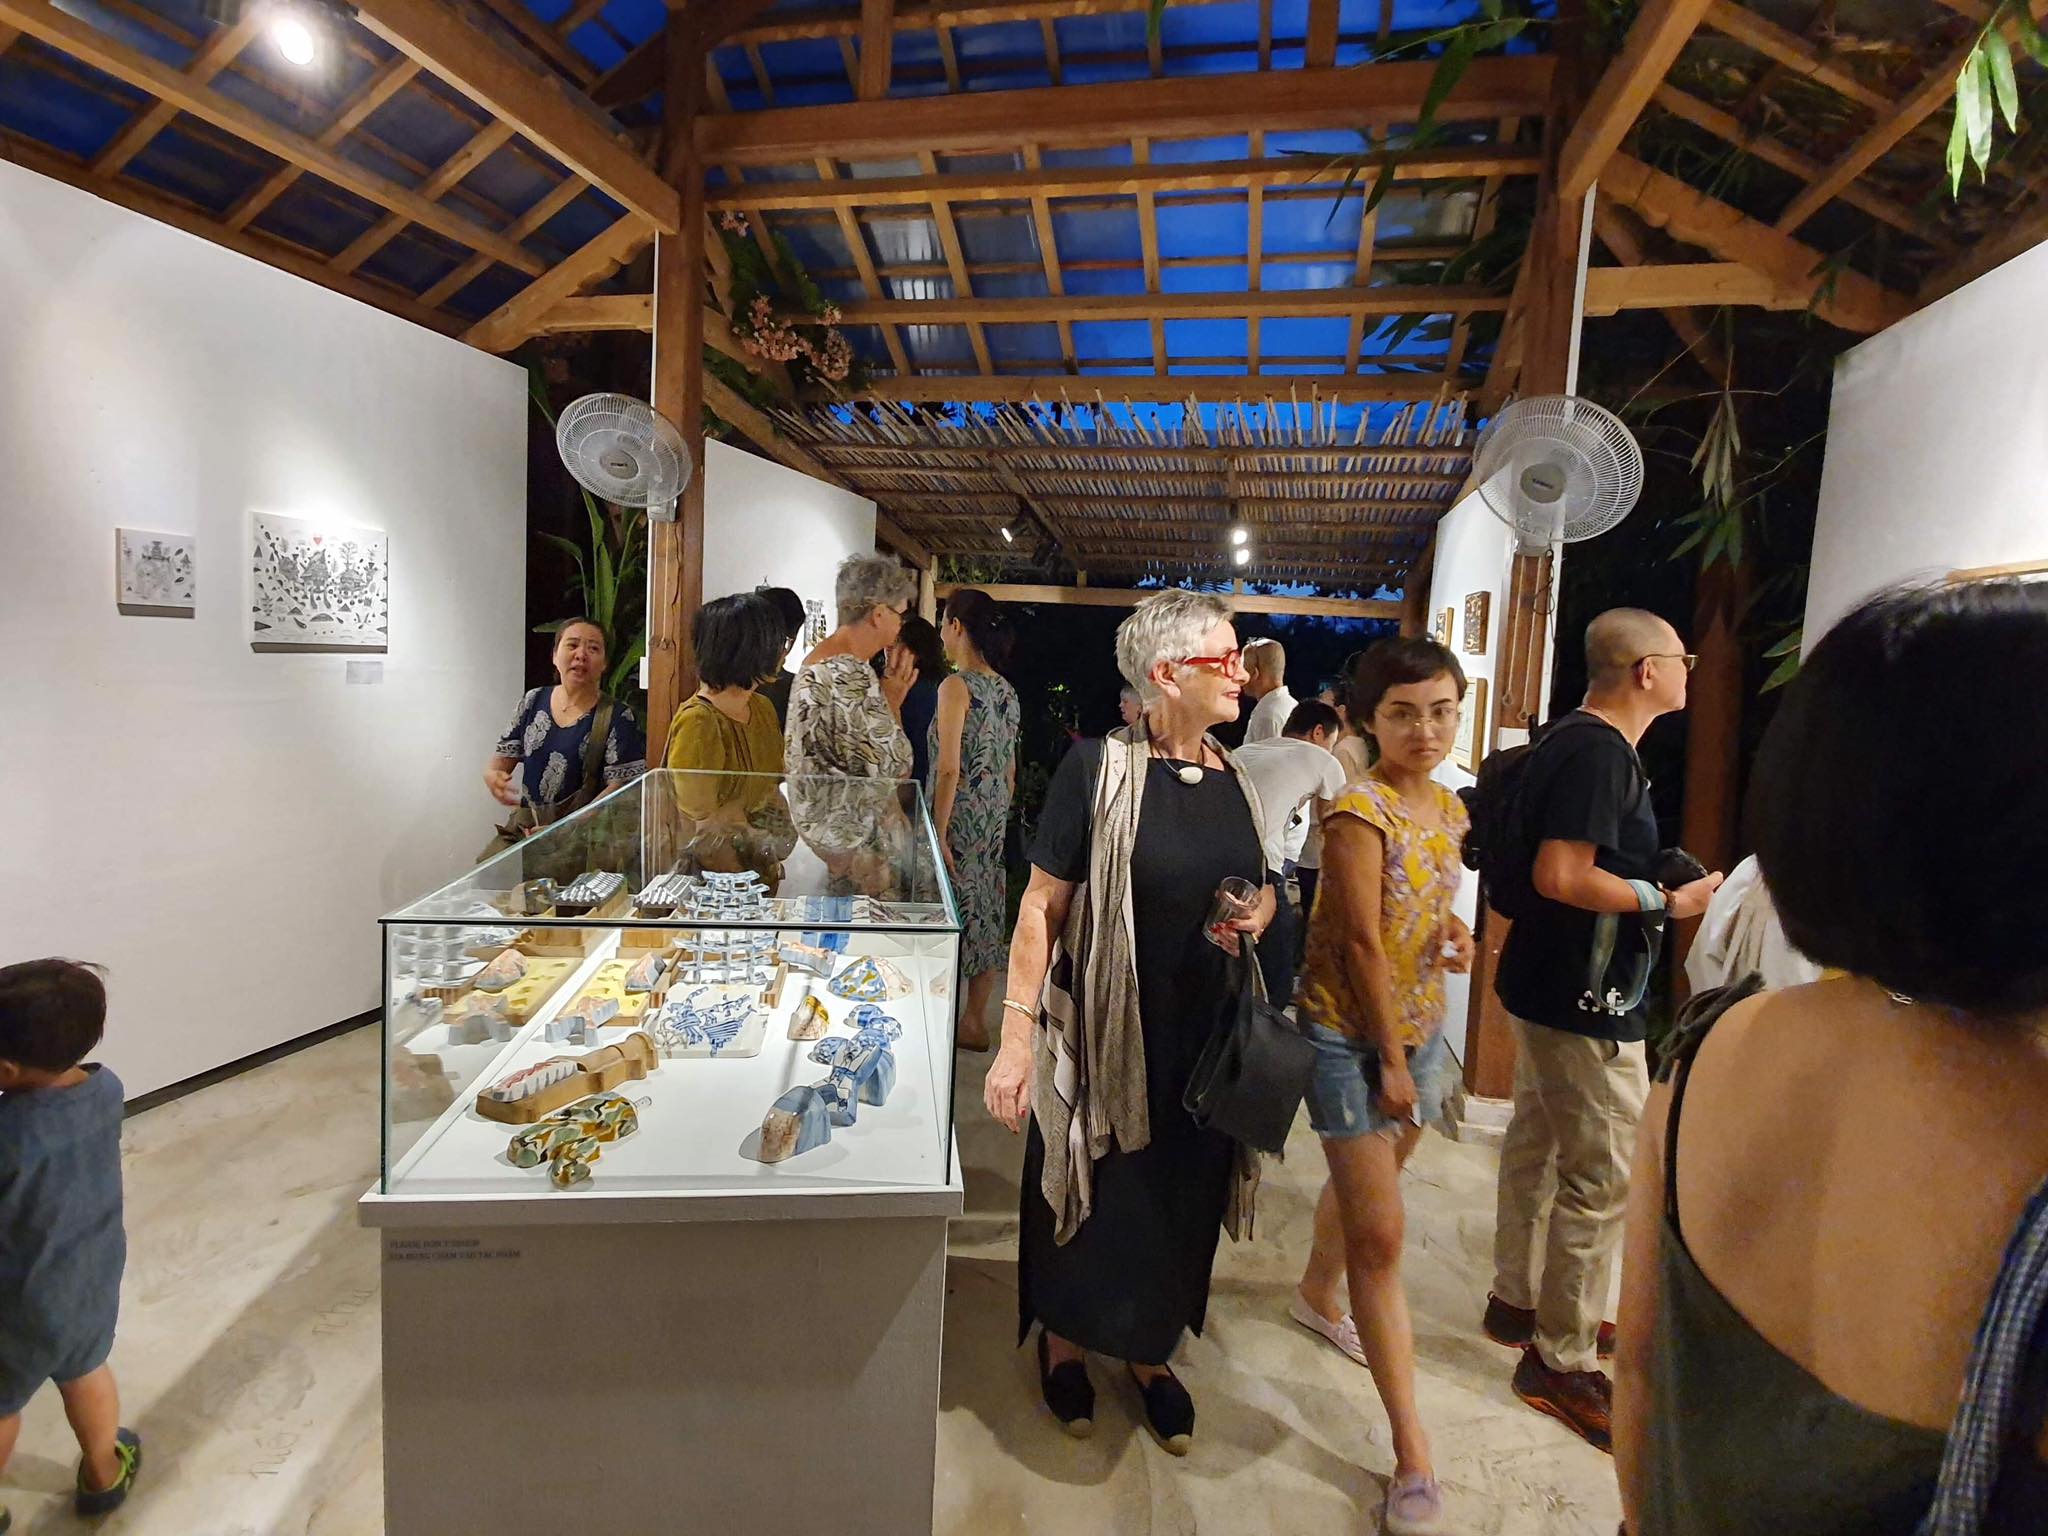 Visitors watch artworks displayed at the Molding Island City exhibition in Hoi An, central Vietnam